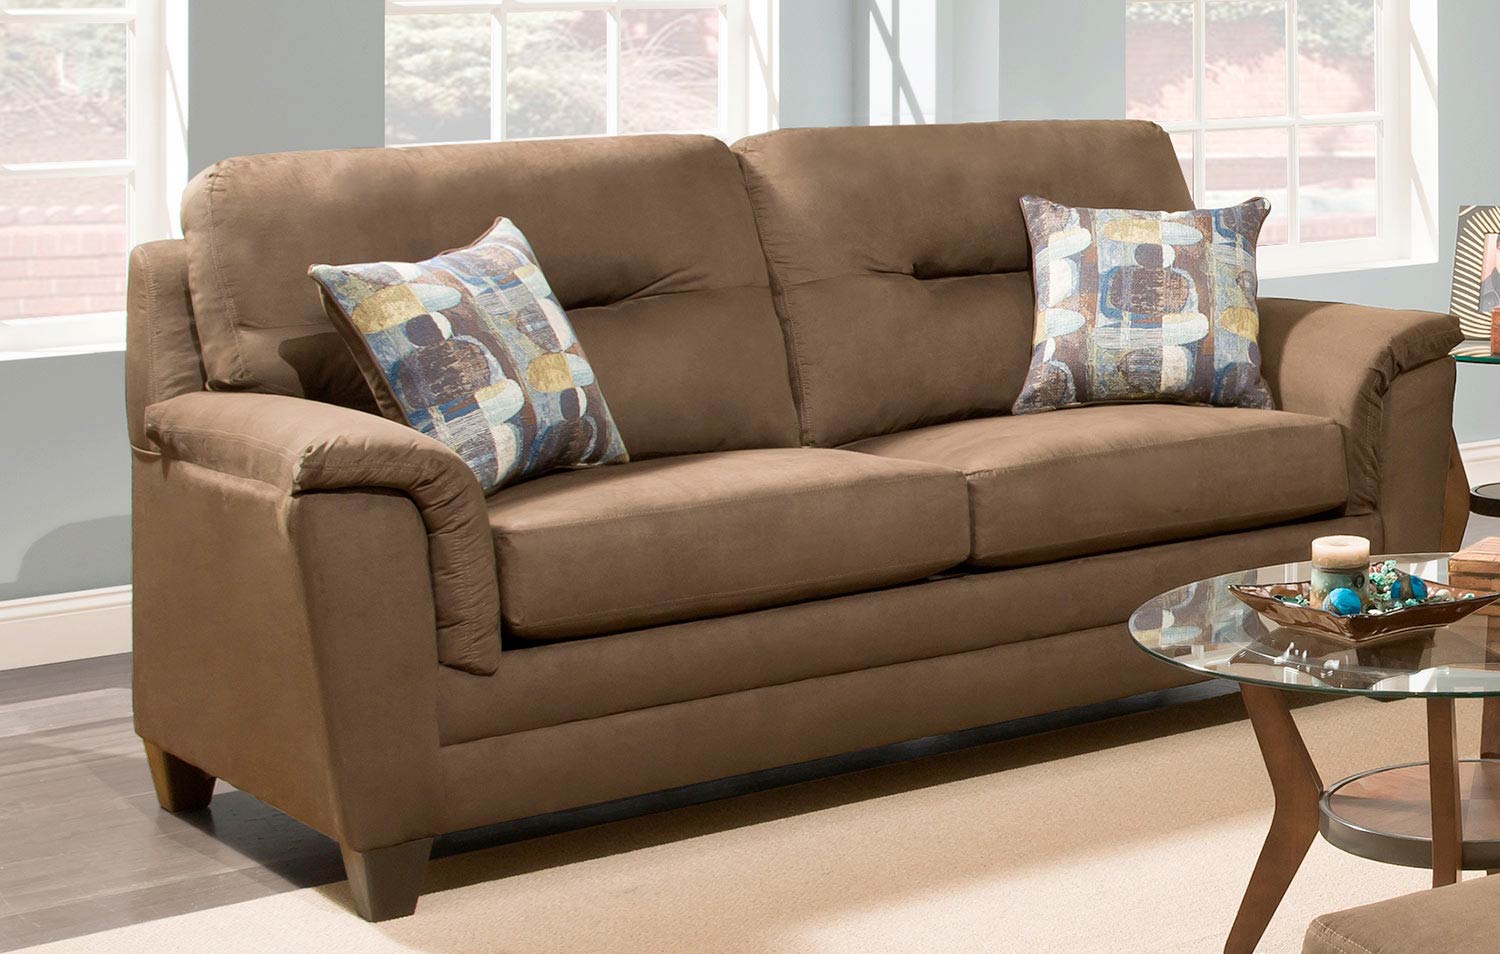 Chelsea Home Cable Sofa - Victory Lane Mink